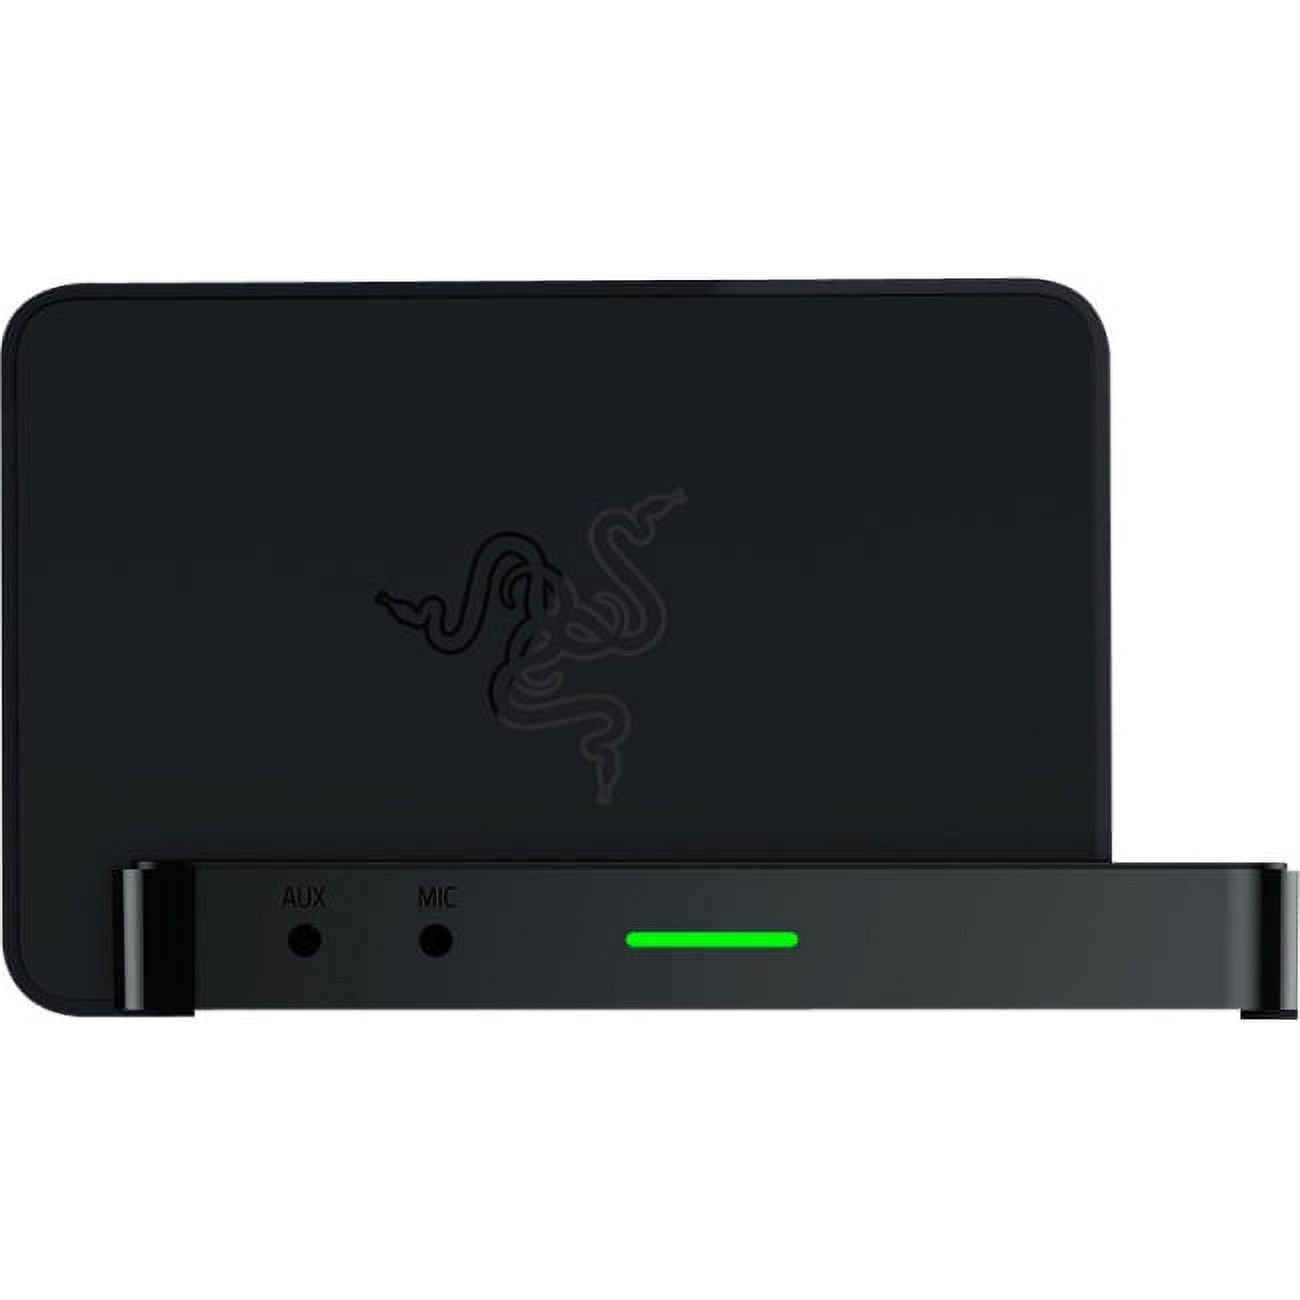 Razer Ripsaw USB 3.0 Game Stream and Capture Card for PC, PlayStation 4 or 3, Xbox One or 360, or Wii U, Uncompressed HD 1080p 60fps - image 1 of 50